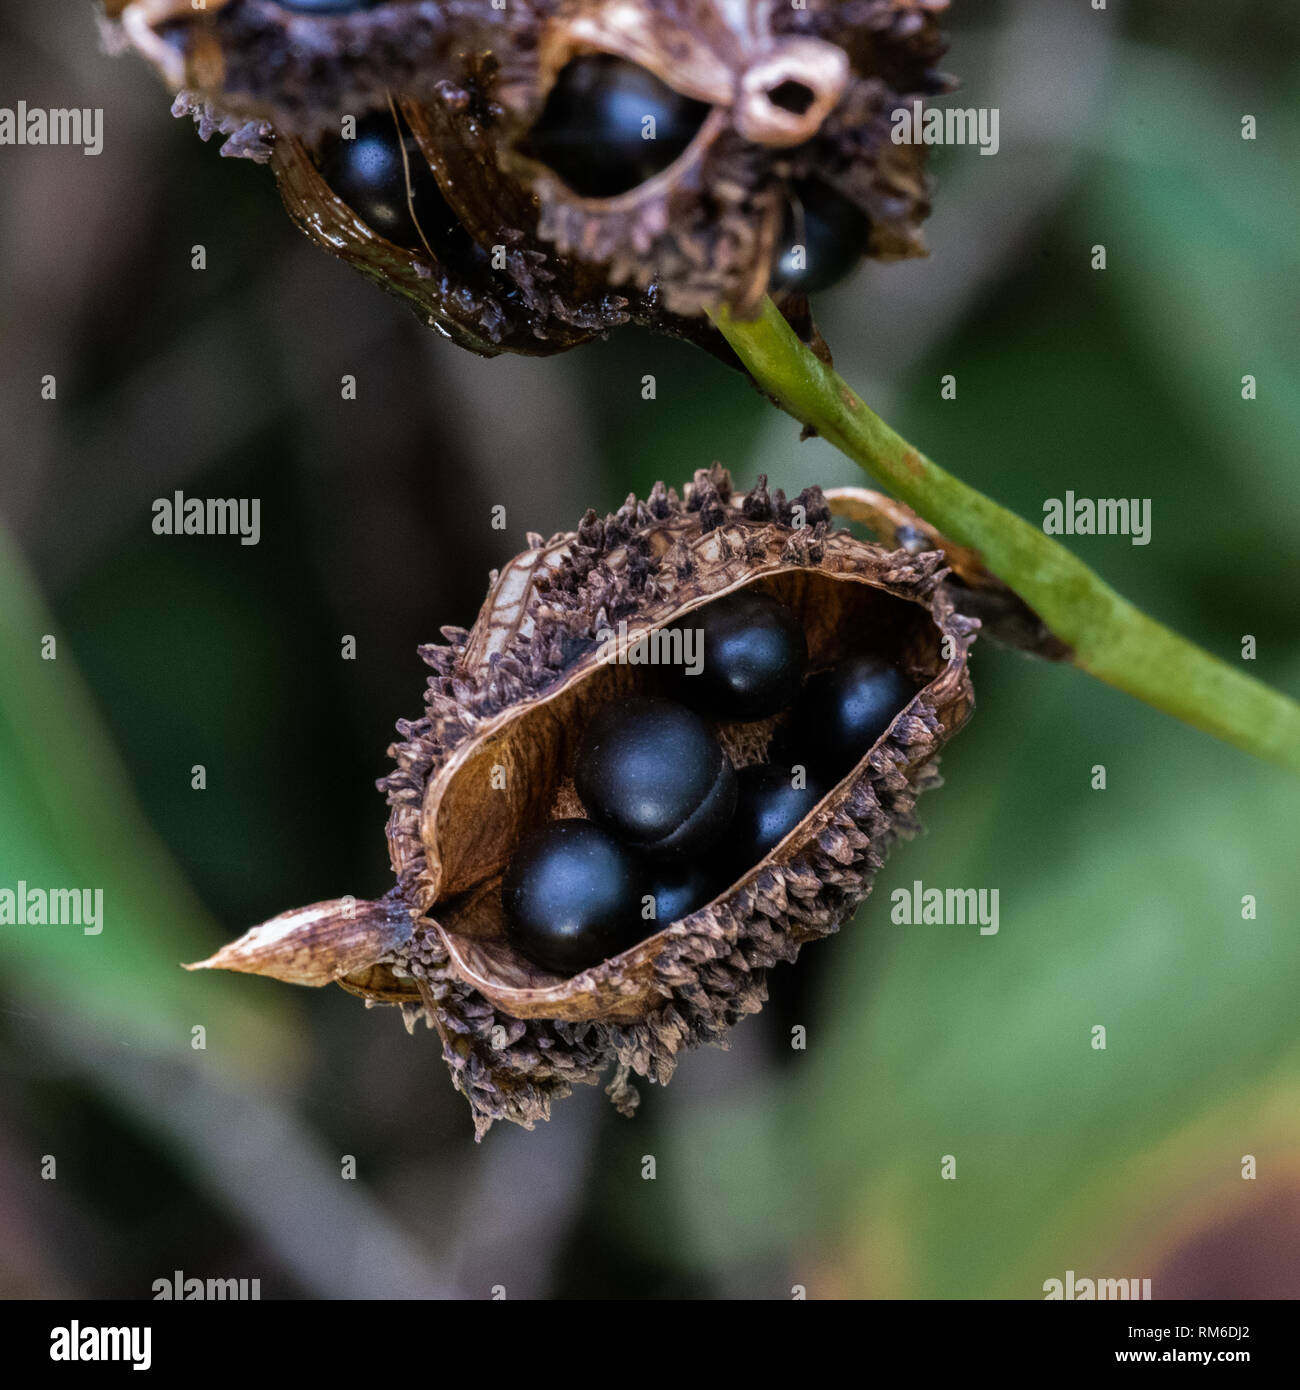 A close view of a split seed pod and seeds of the Canna lilly, Natal Midlands, South Africa. Stock Photo